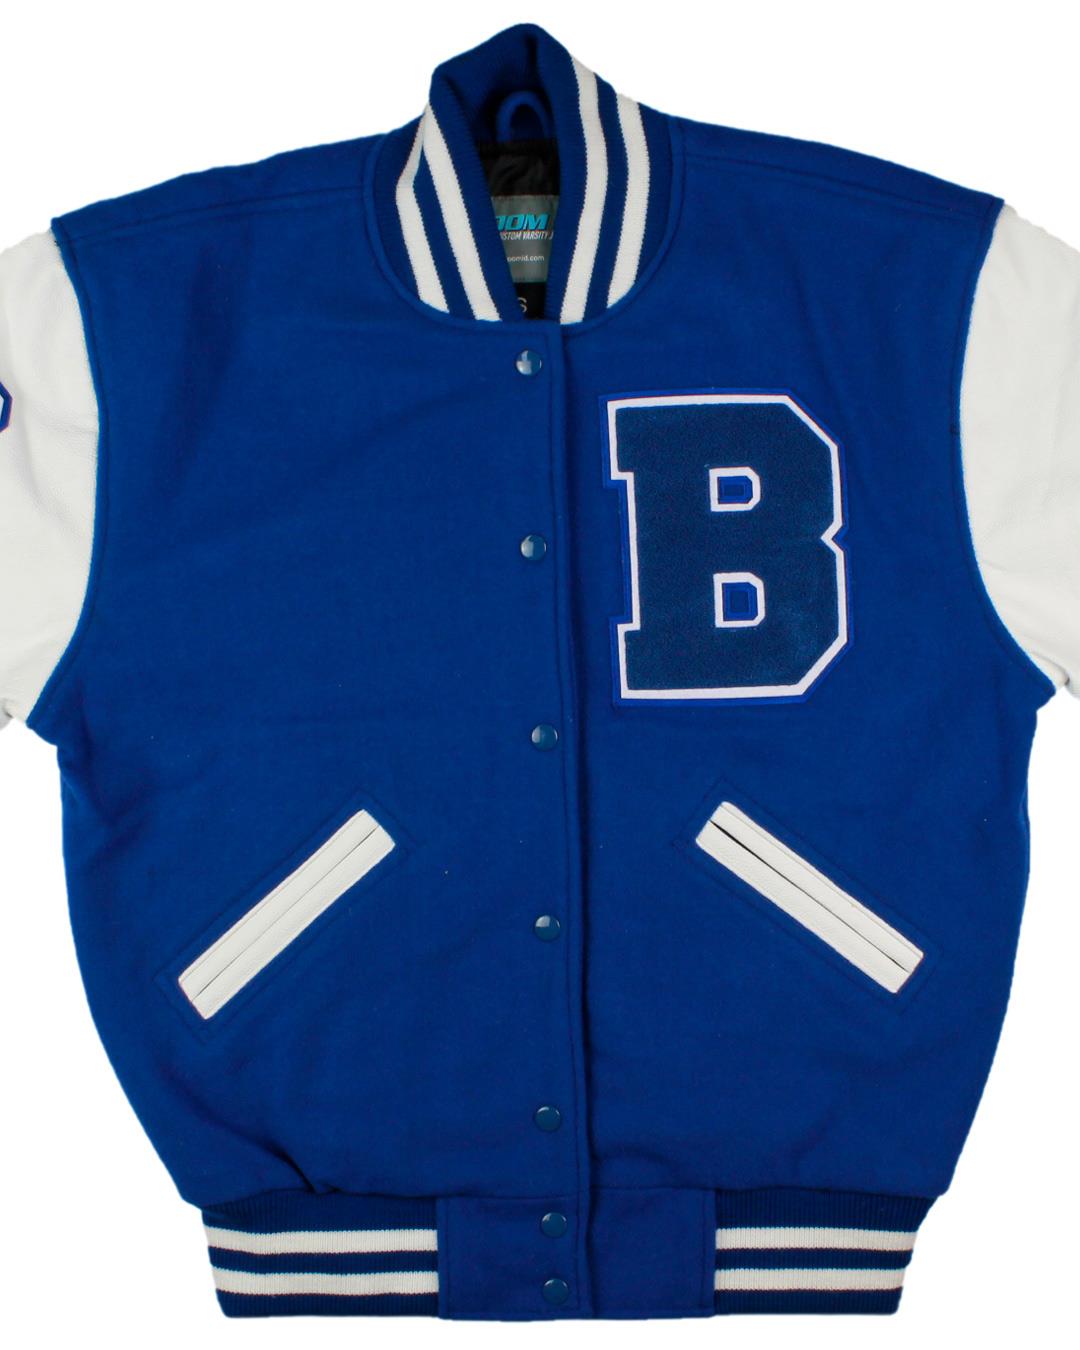 Beaumont High School Cougars Varsity Jacket, Beaumont, CA - Front